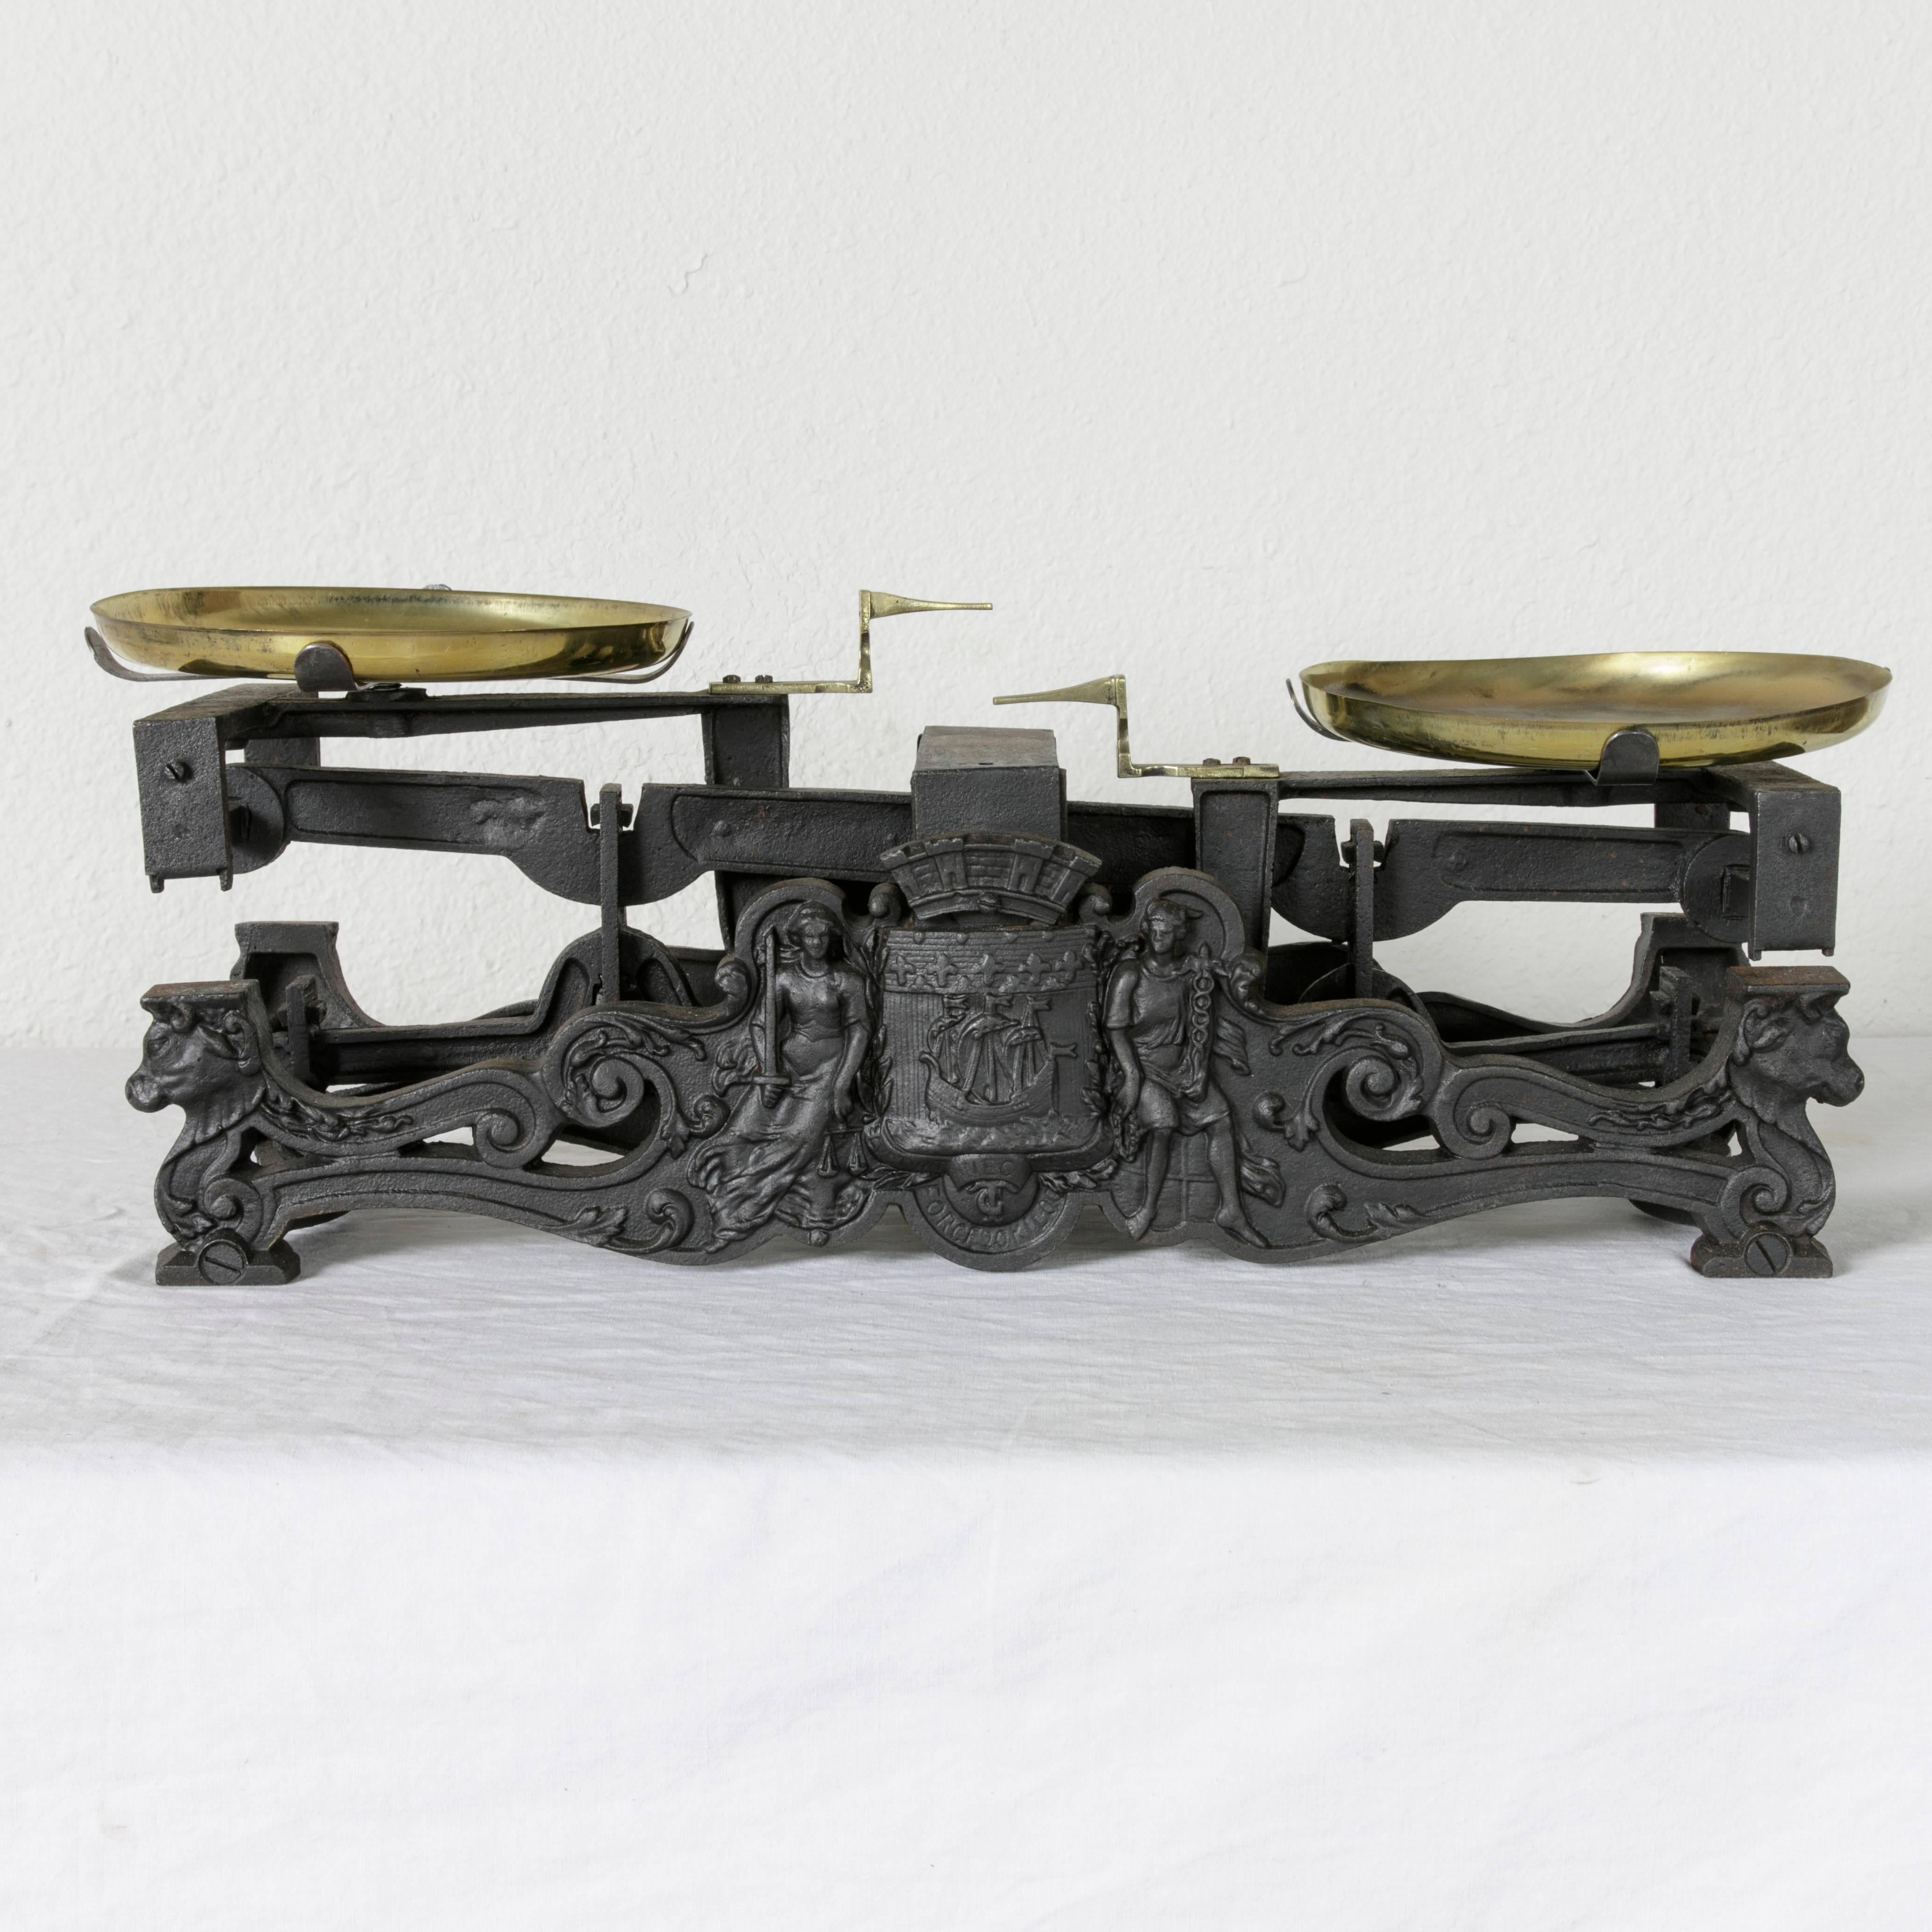 This set of late nineteenth century French iron baker's scales is double faced and features the coat of arms of the city of Paris flanked by the messenger god Mercury and Lady Justice. Under the coat of arms is marked Force 20 Kilos, indicating the